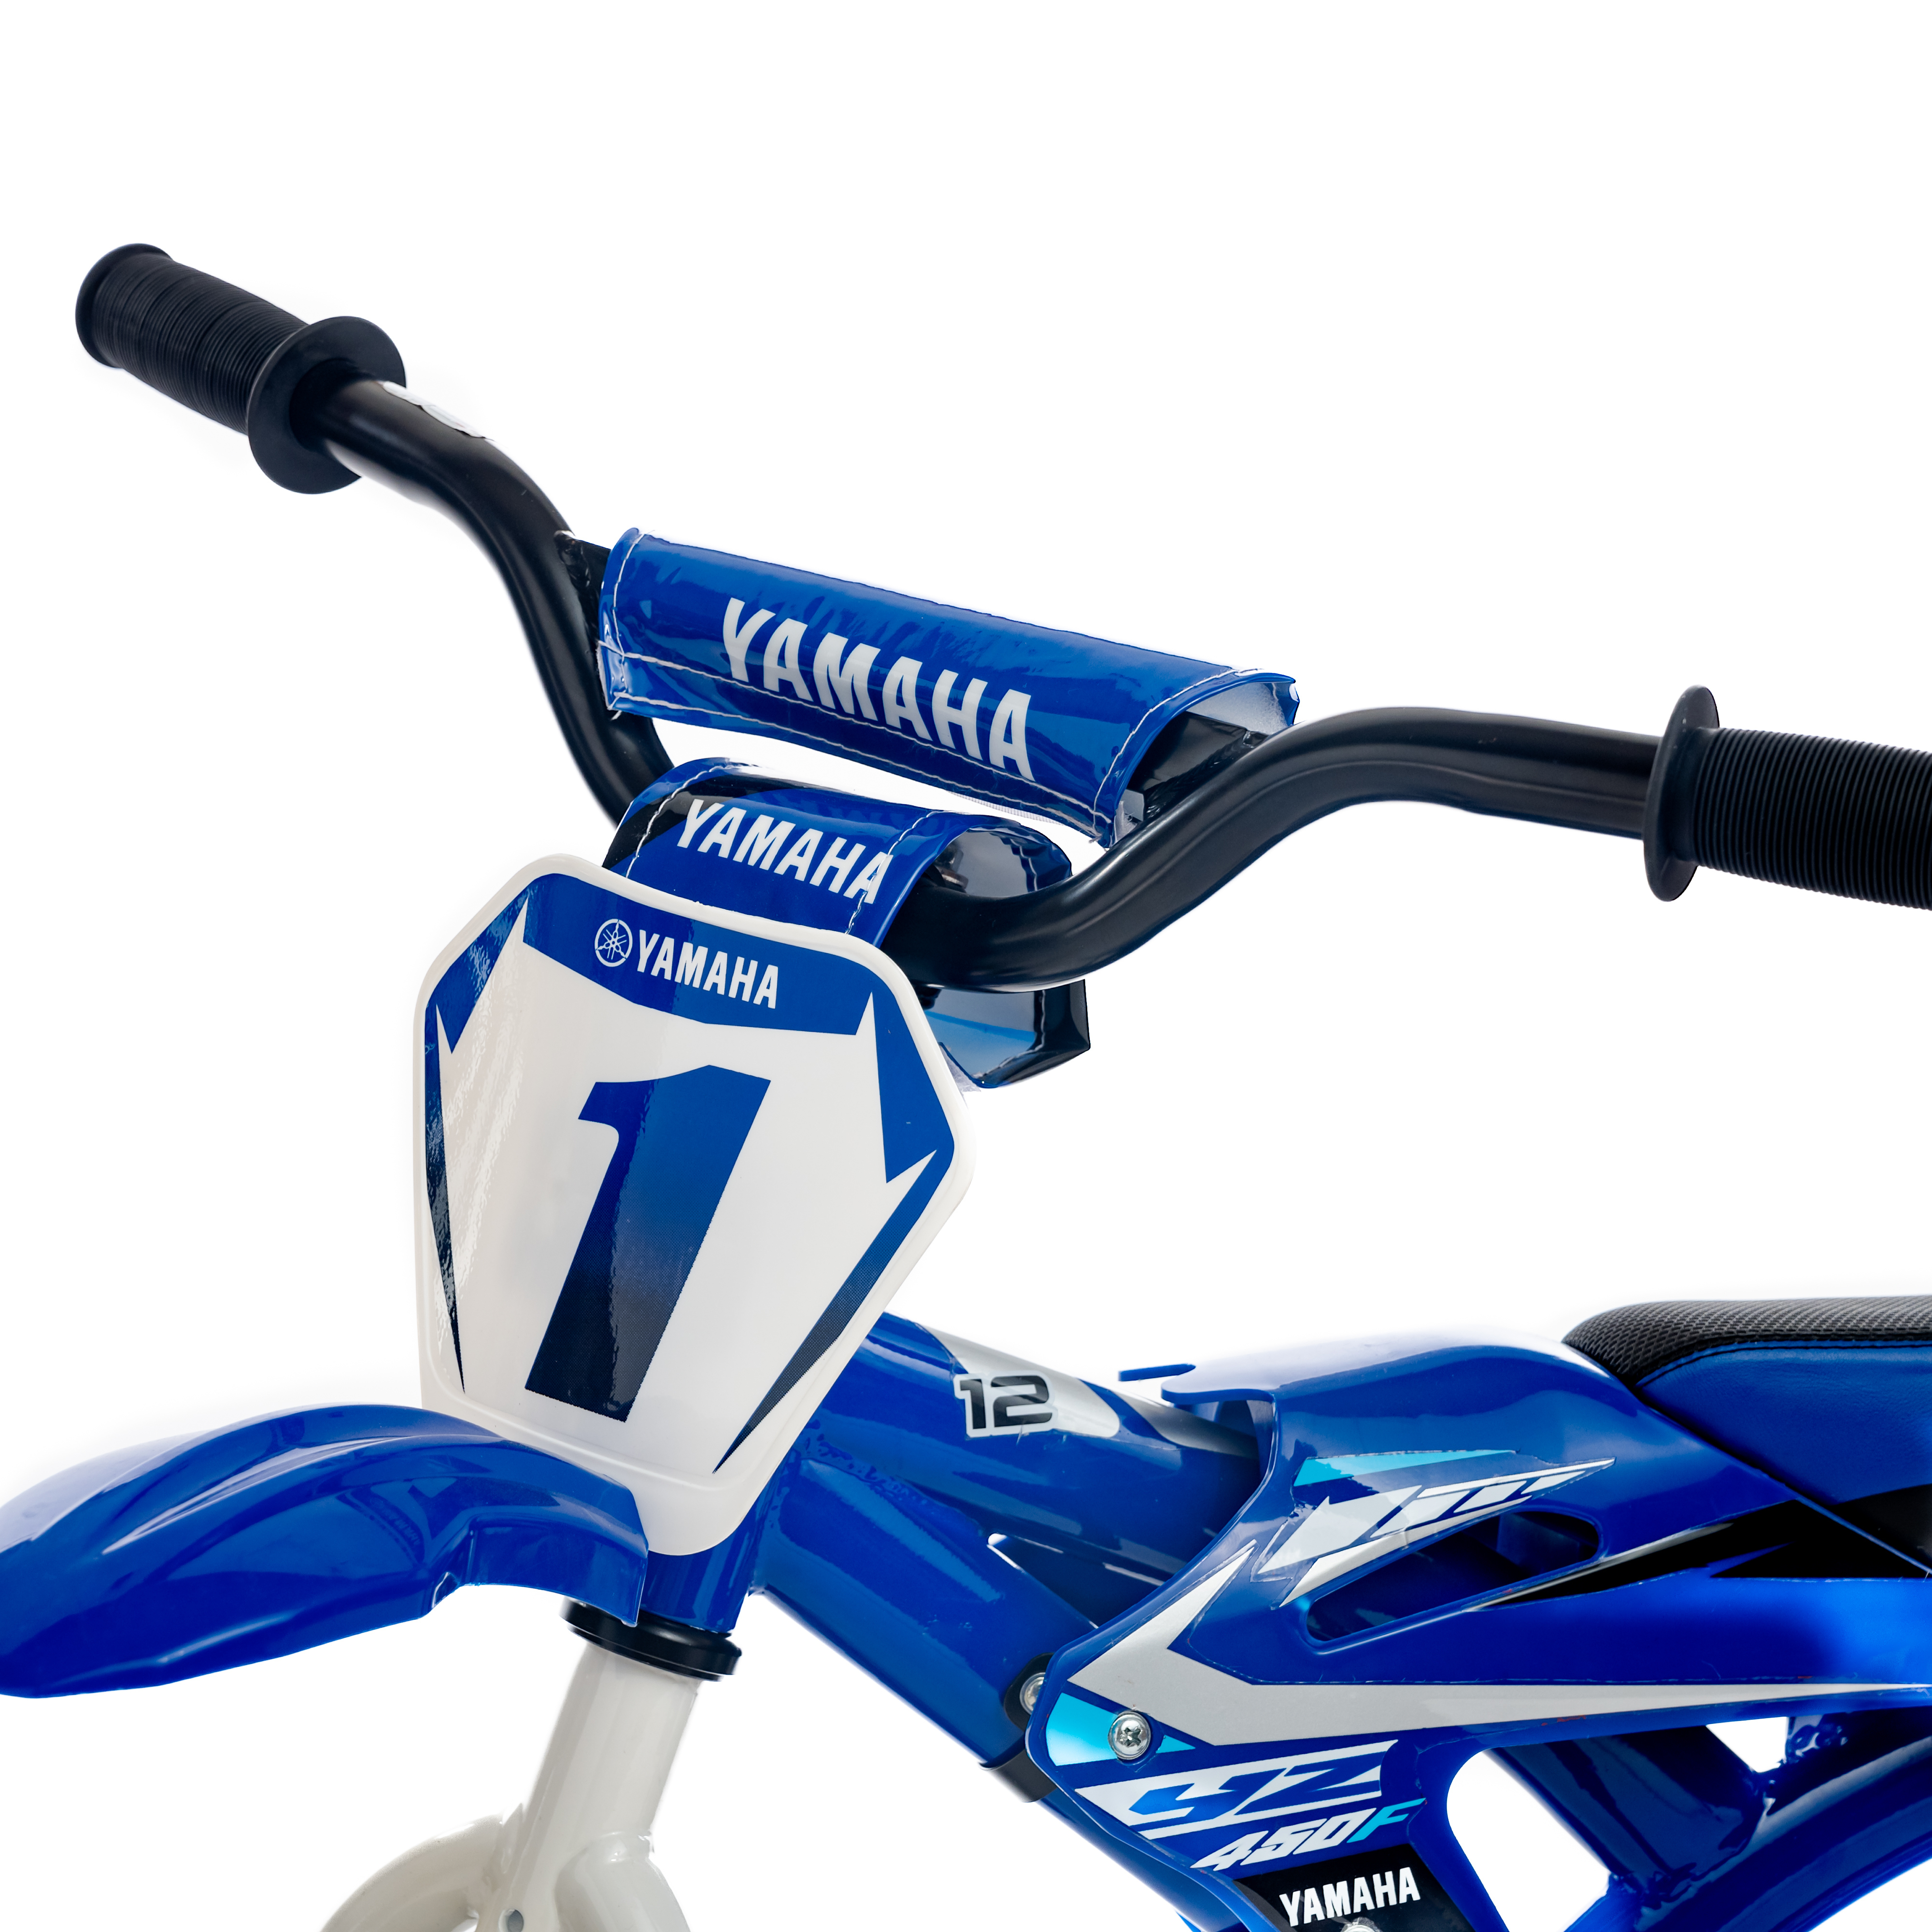 12in Yamaha Motobike for children age 2 to 4 Years old - image 4 of 11